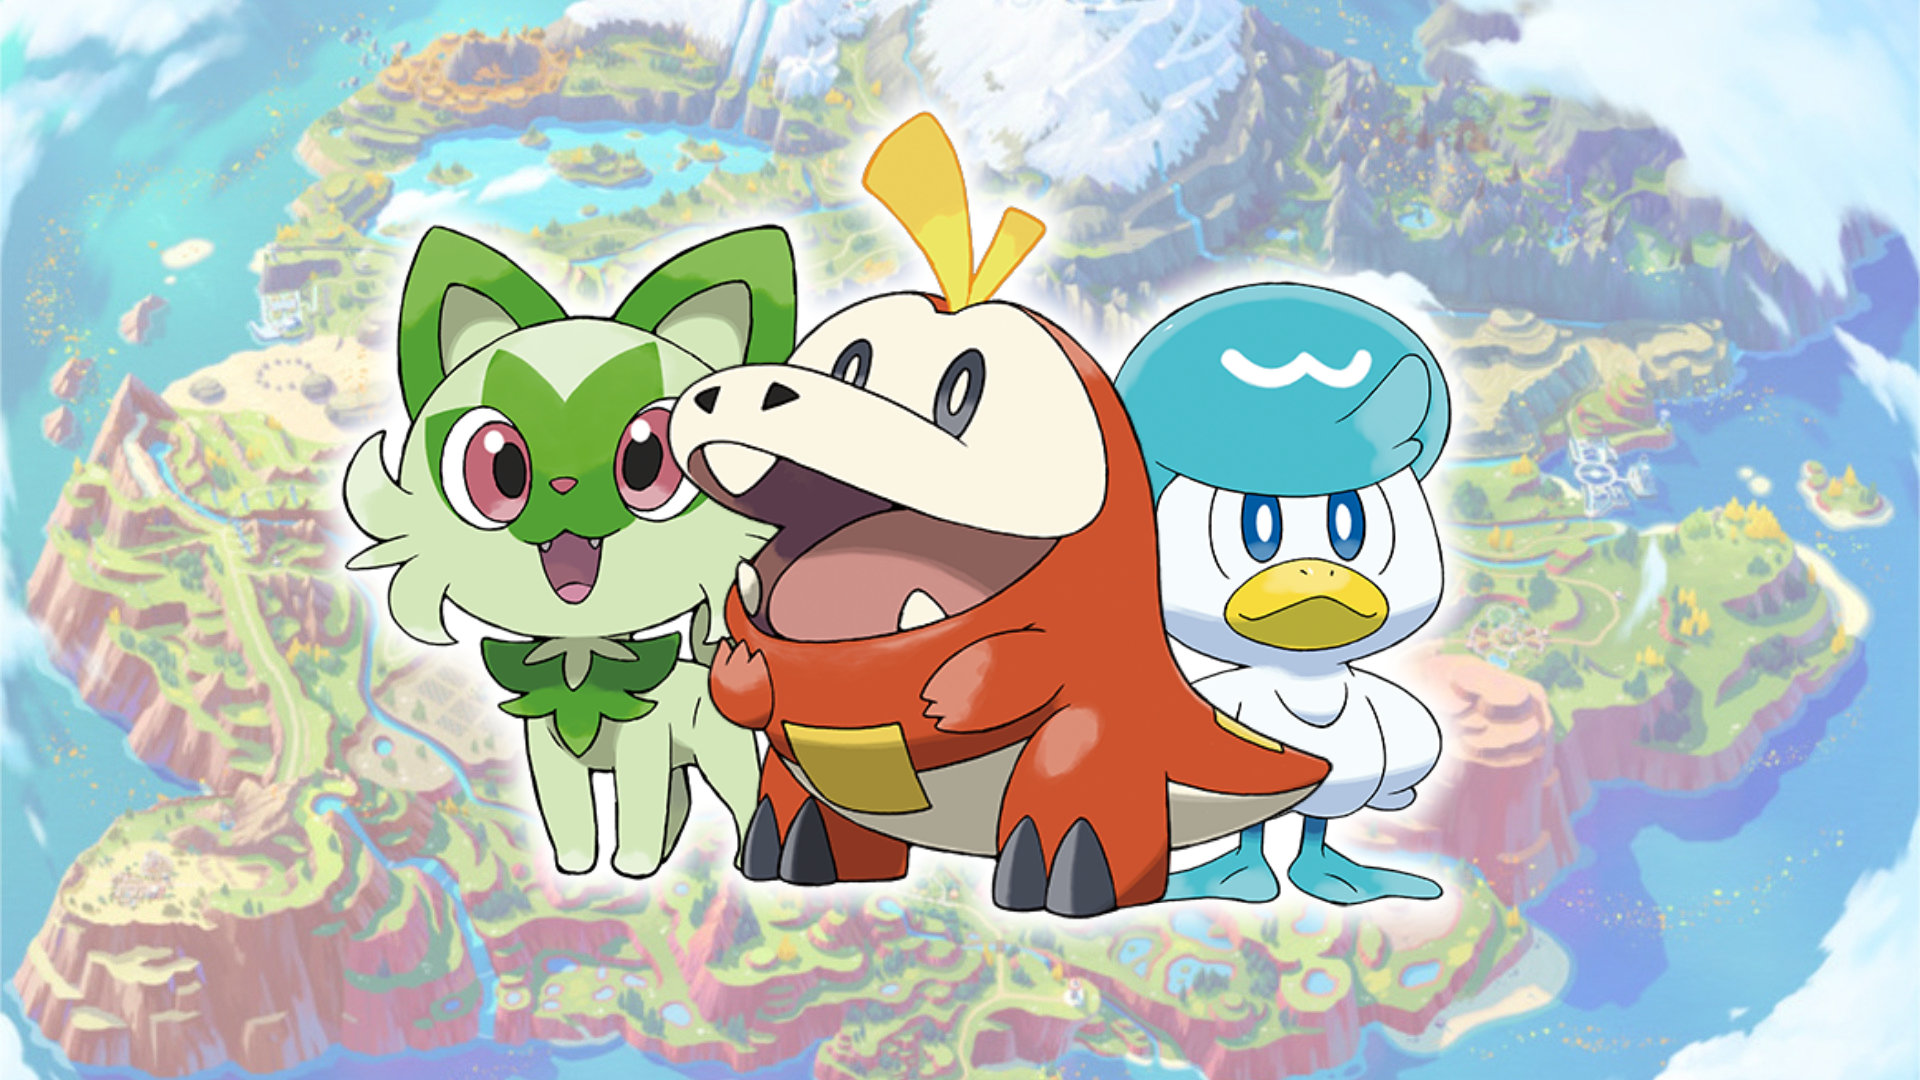 Pokemon Sword and Shield Starters: starter evolutions and help